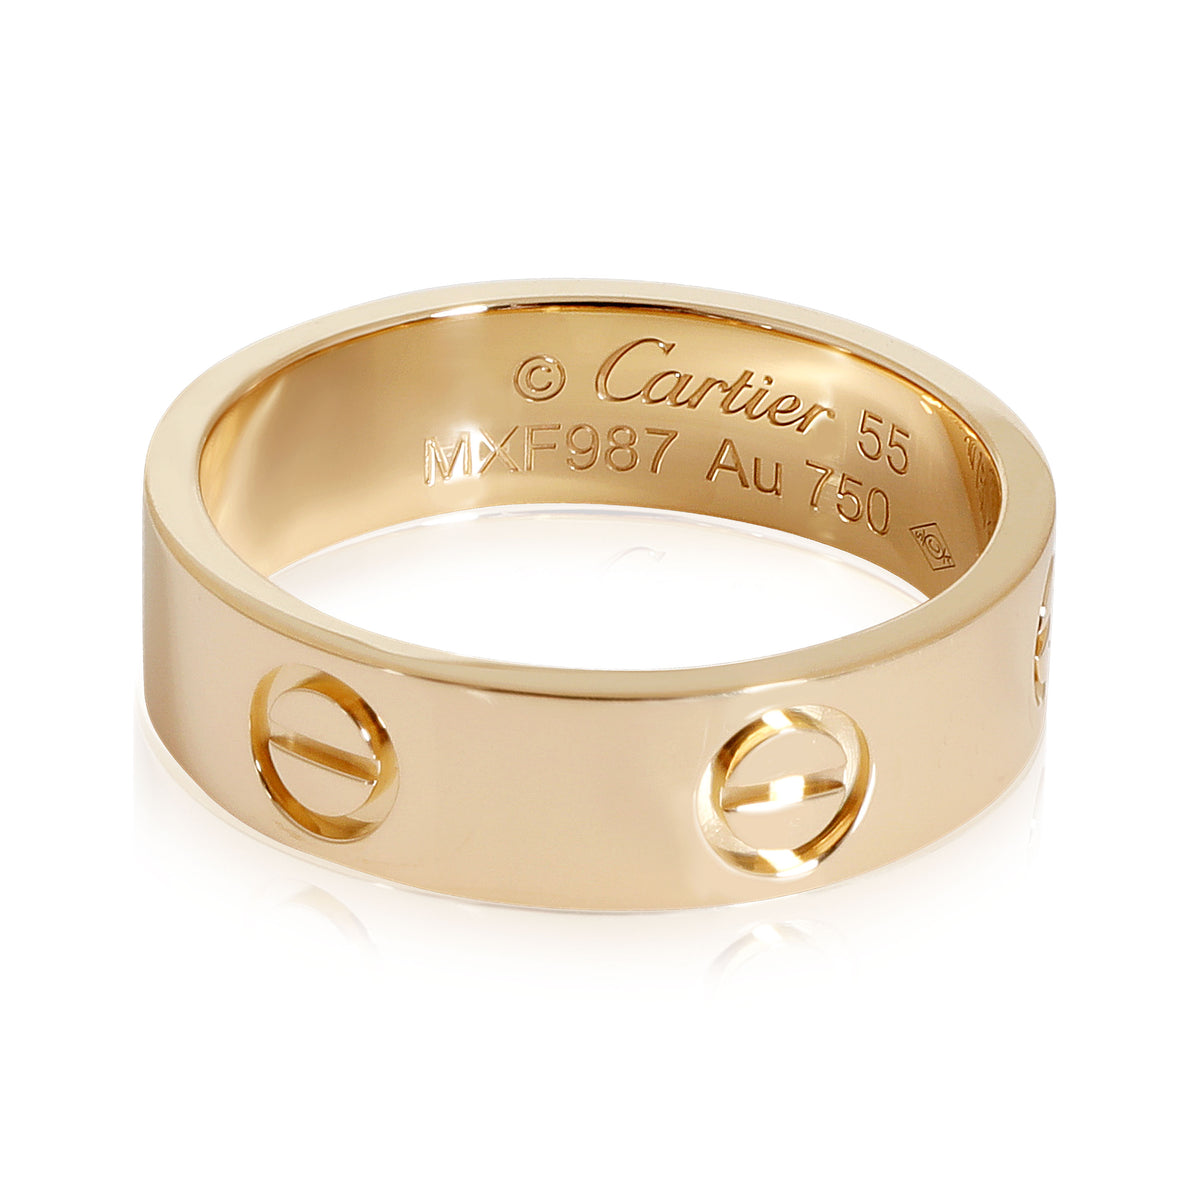 Cartier Love Band in 18k Yellow Gold | myGemma | Item #112849